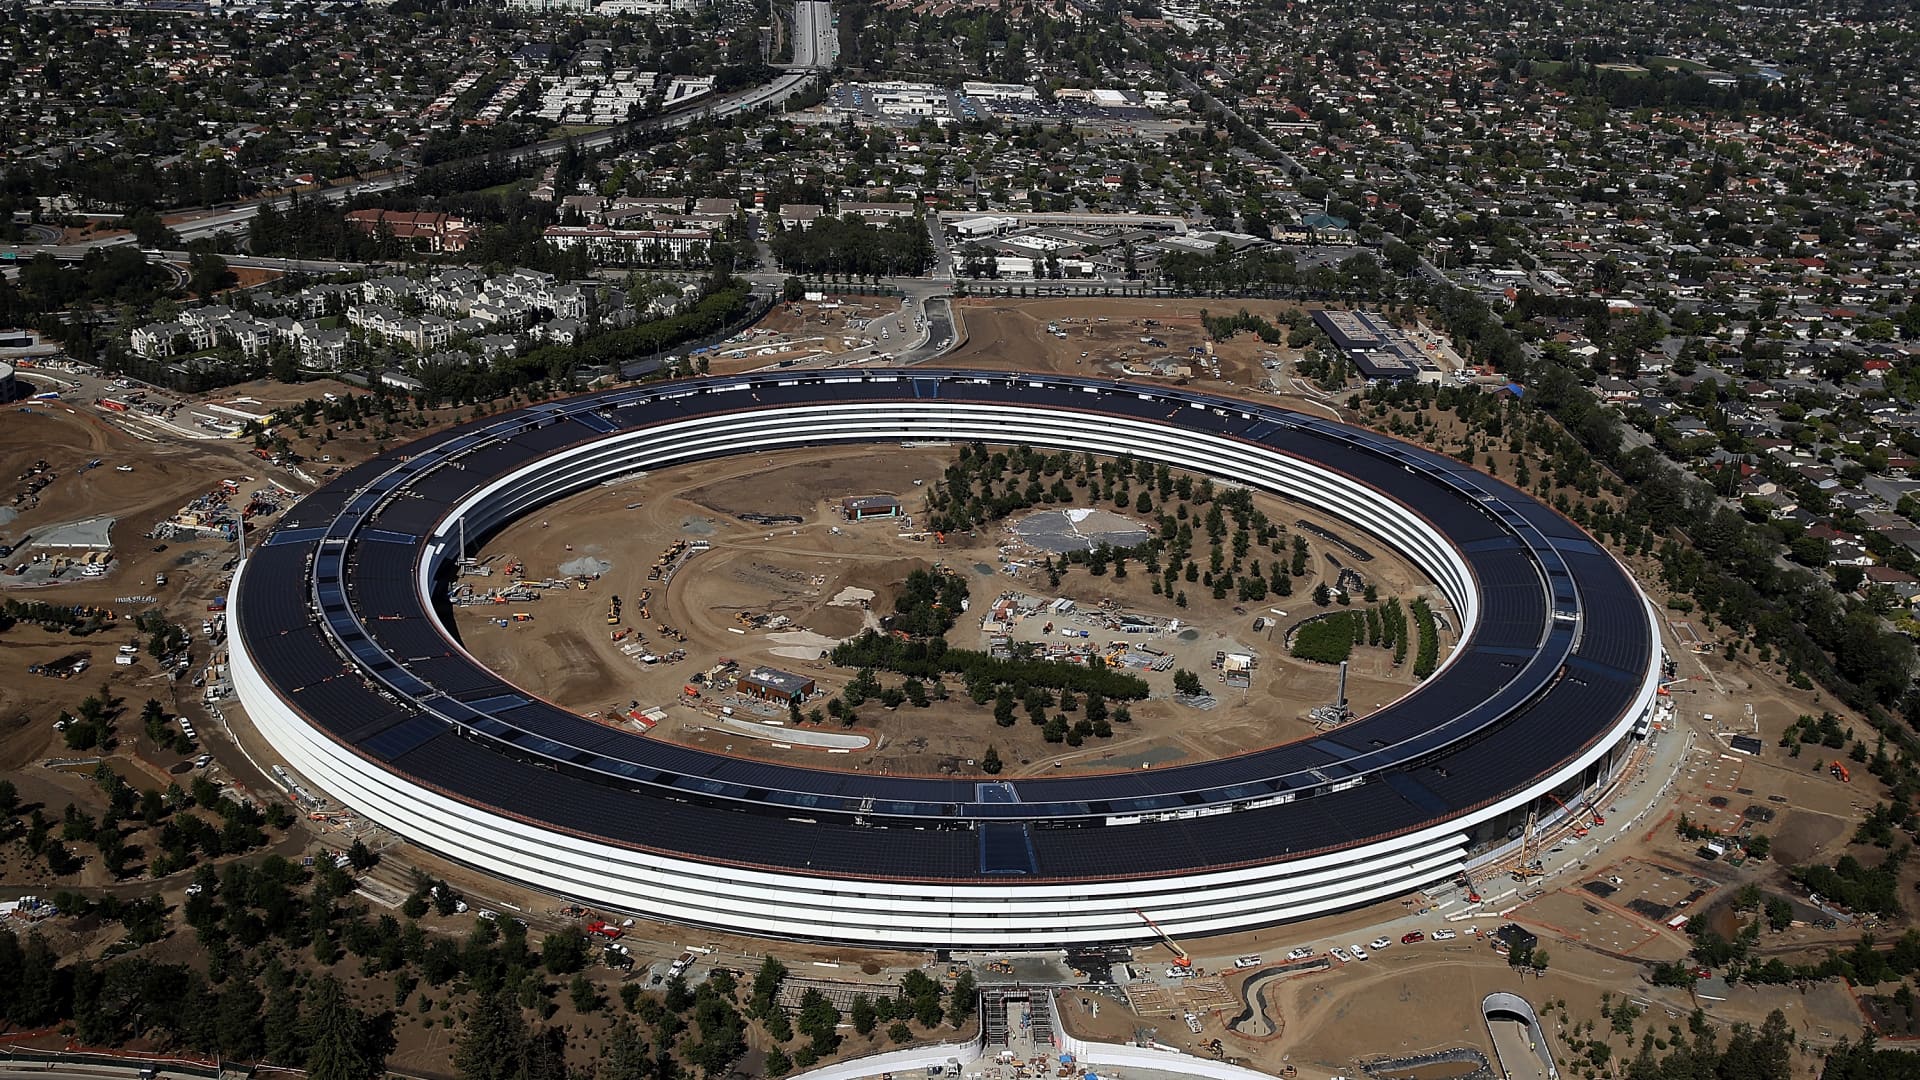 An aerial view of the new Apple headquarters on April 28, 2017 in Cupertino, California.